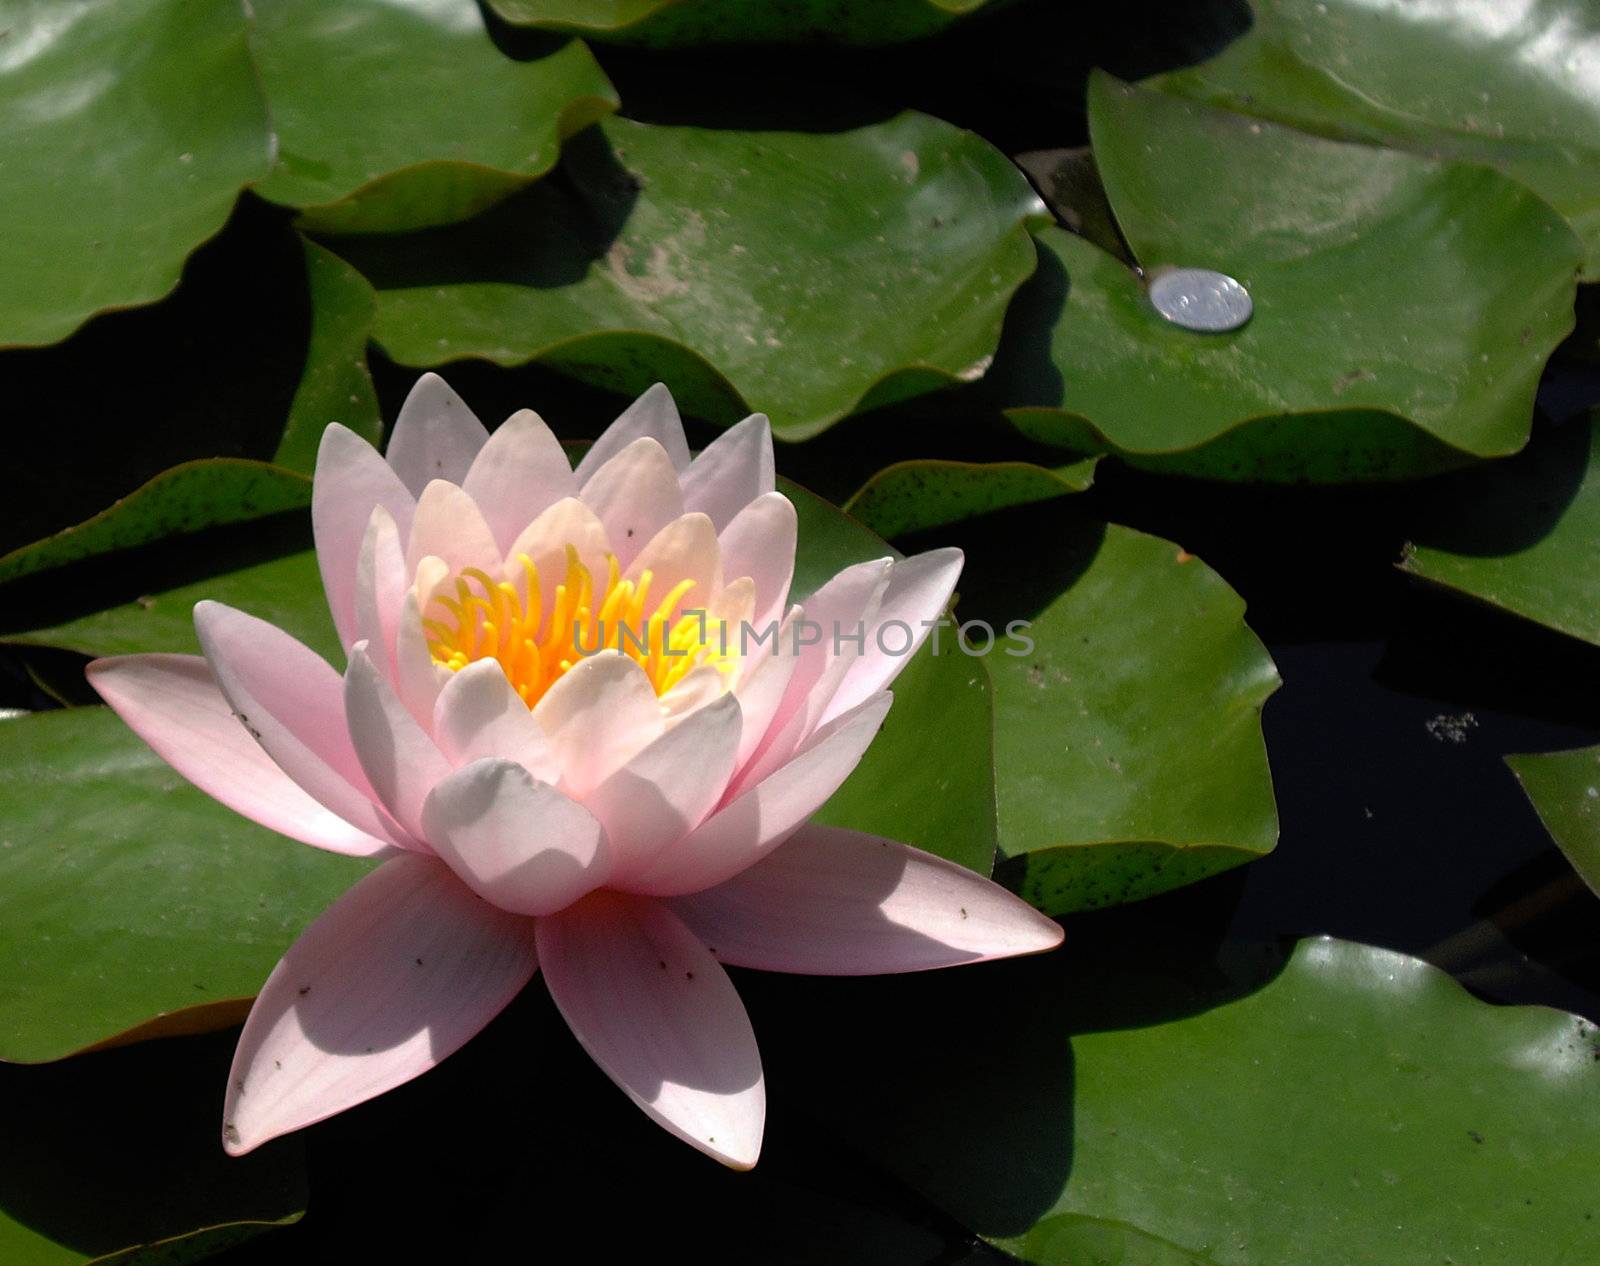 pink water lily flower